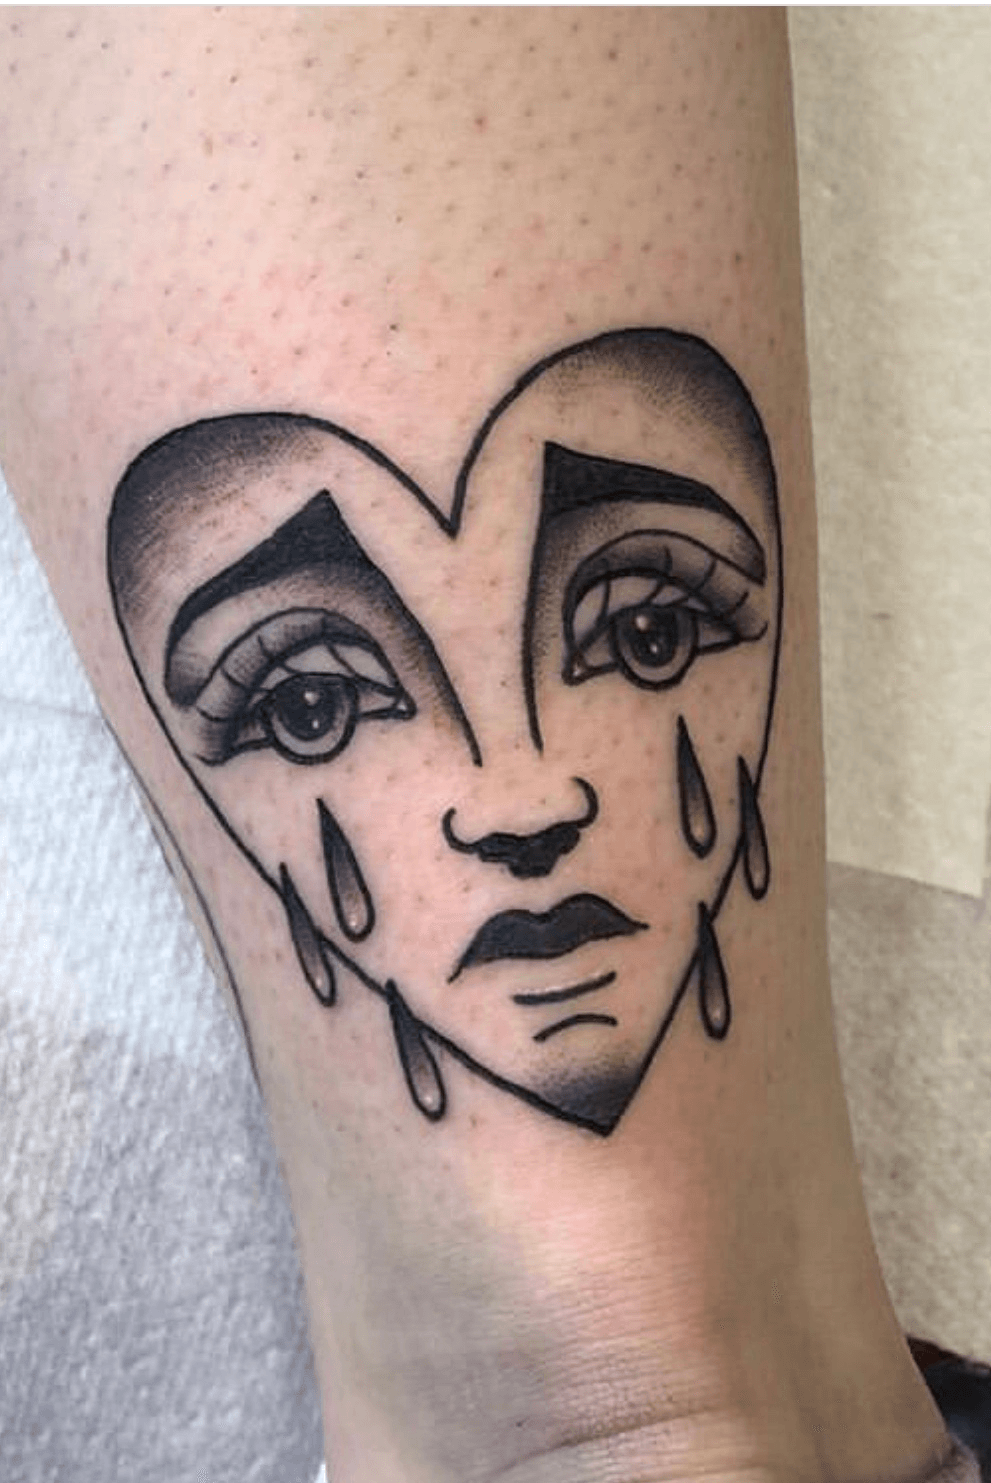 150 Laugh Now Cry Later Tattoos That Embrace The Dichotomy